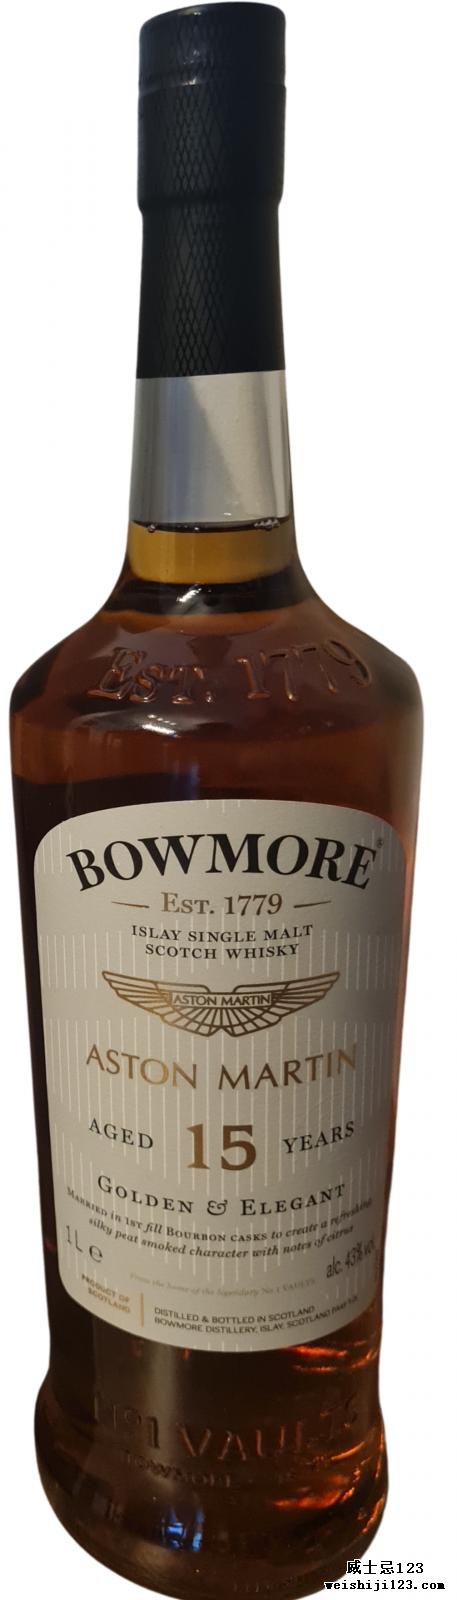 Bowmore 15-year-old